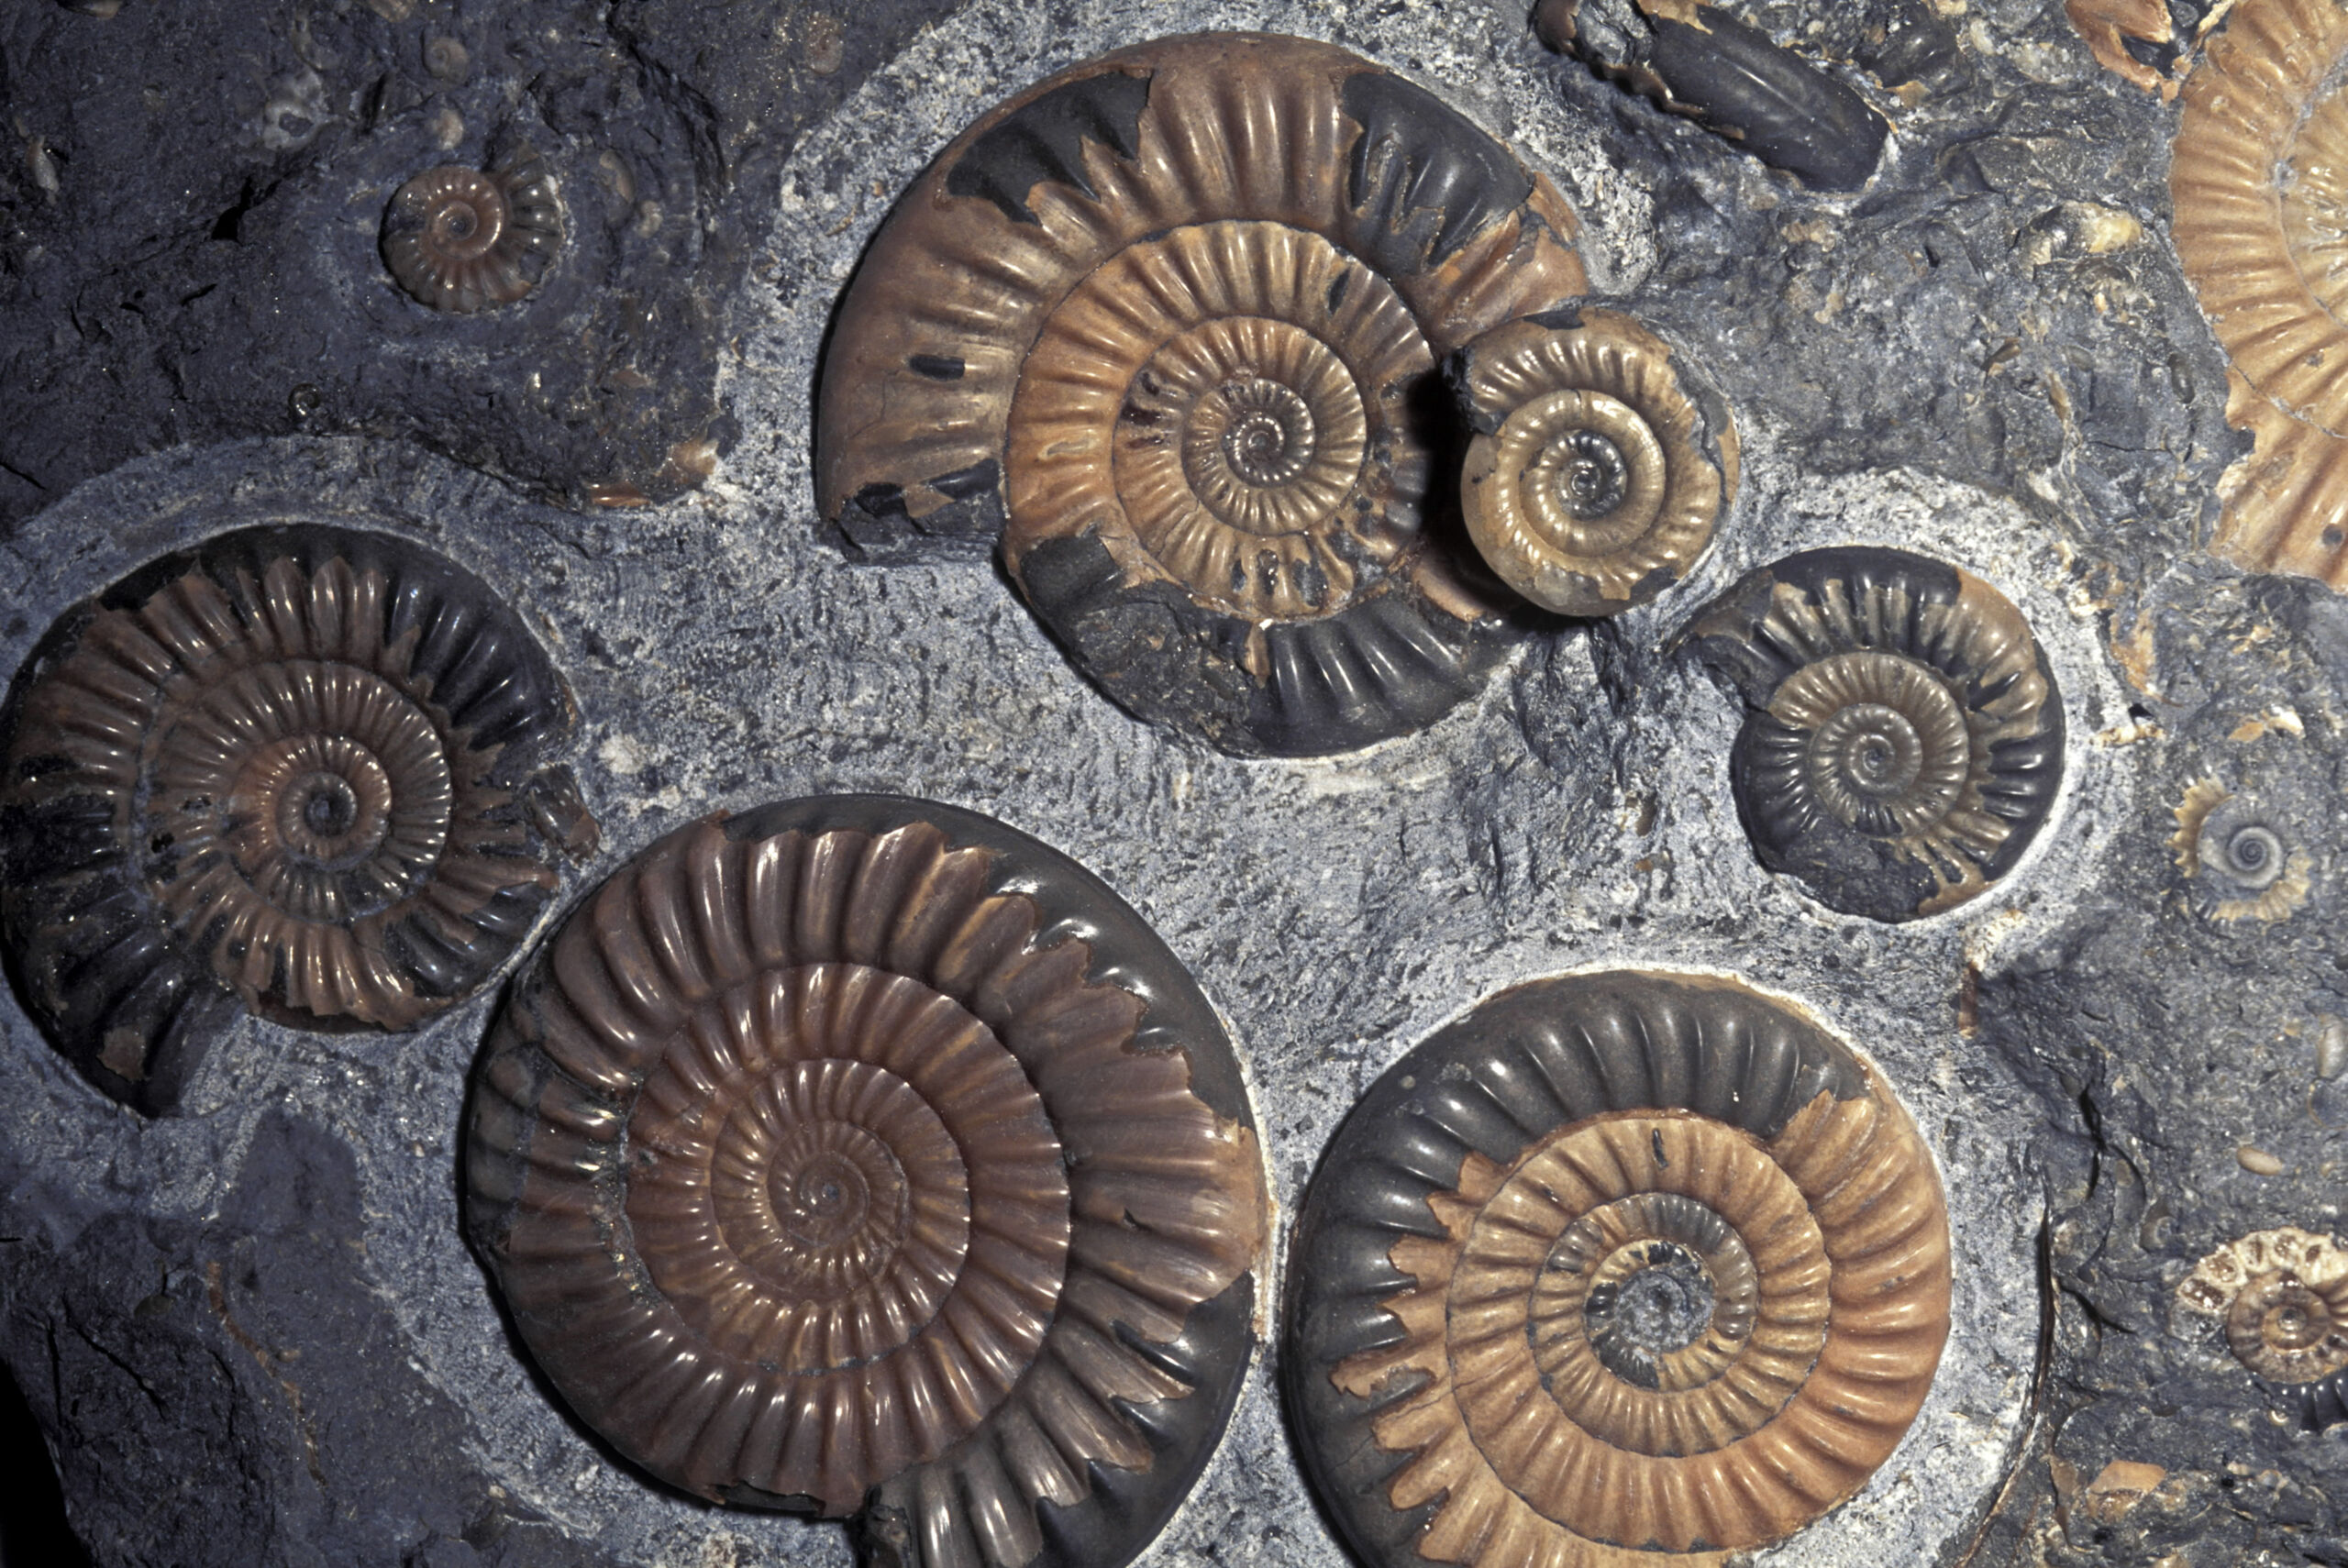 Fossil ammonites are often found intact and not crushed to small pieces, as they were at this site.